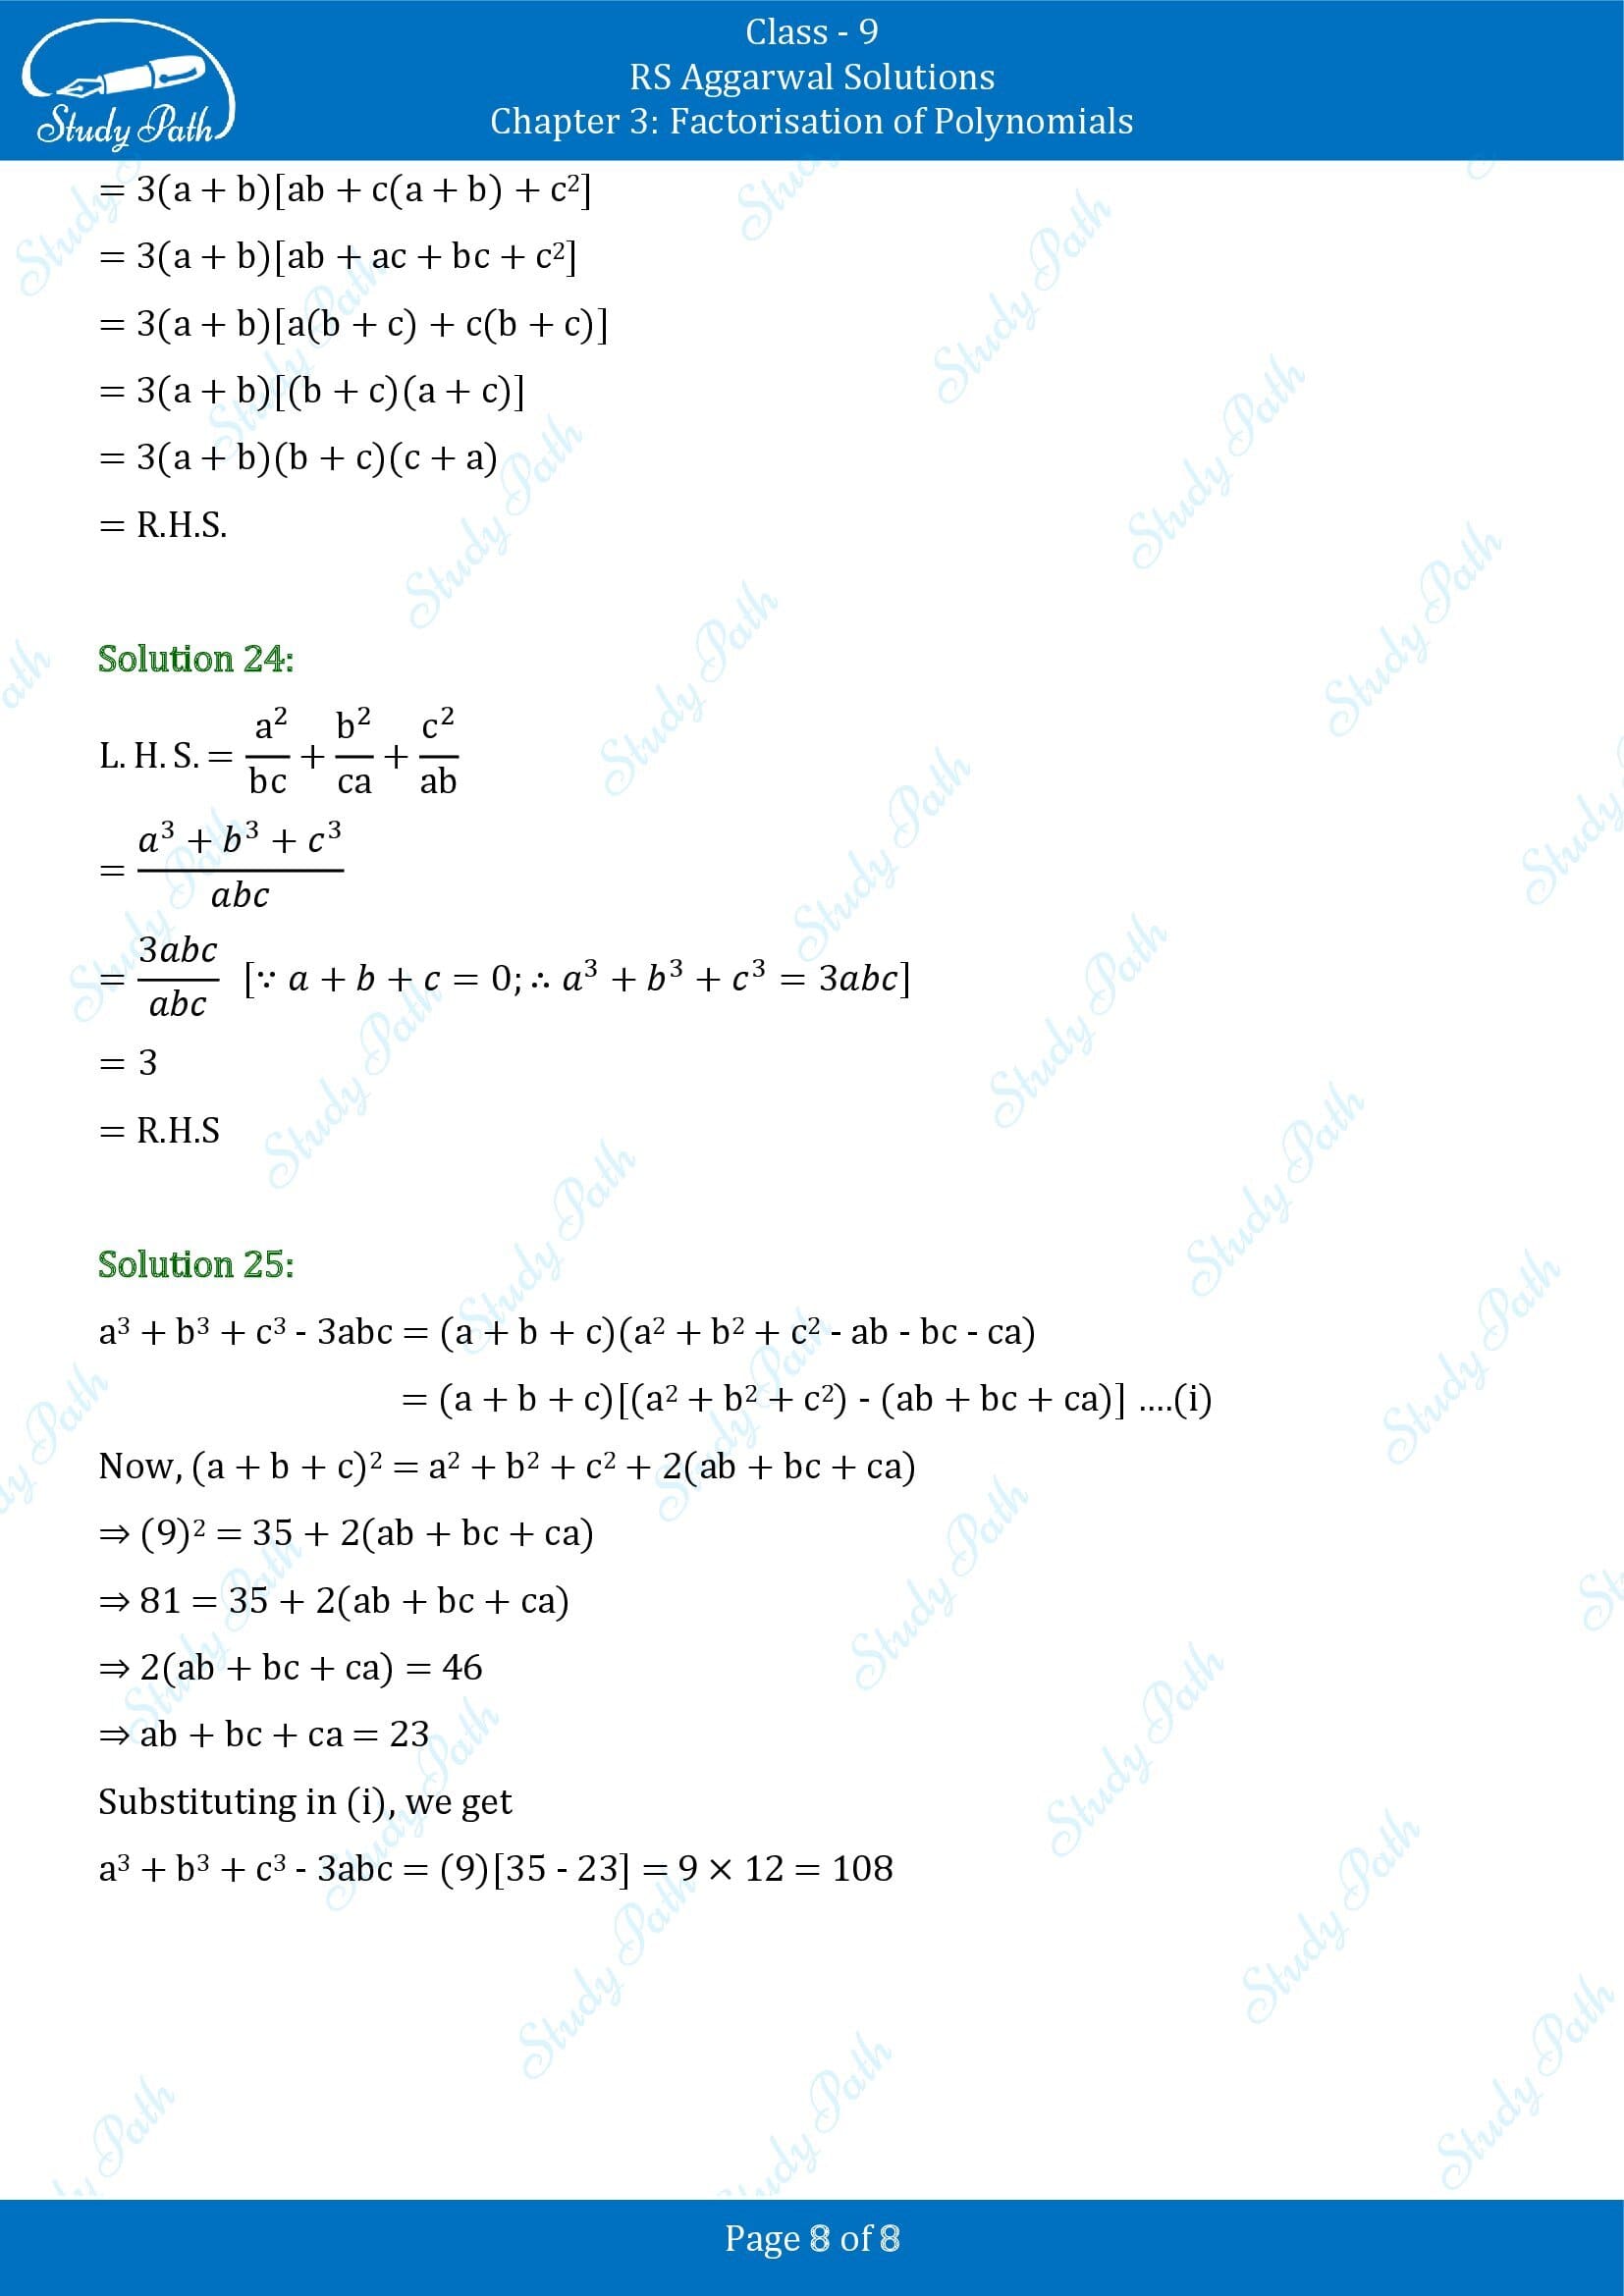 RS Aggarwal Solutions Class 9 Chapter 3 Factorisation of Polynomials Exercise 3G 0008